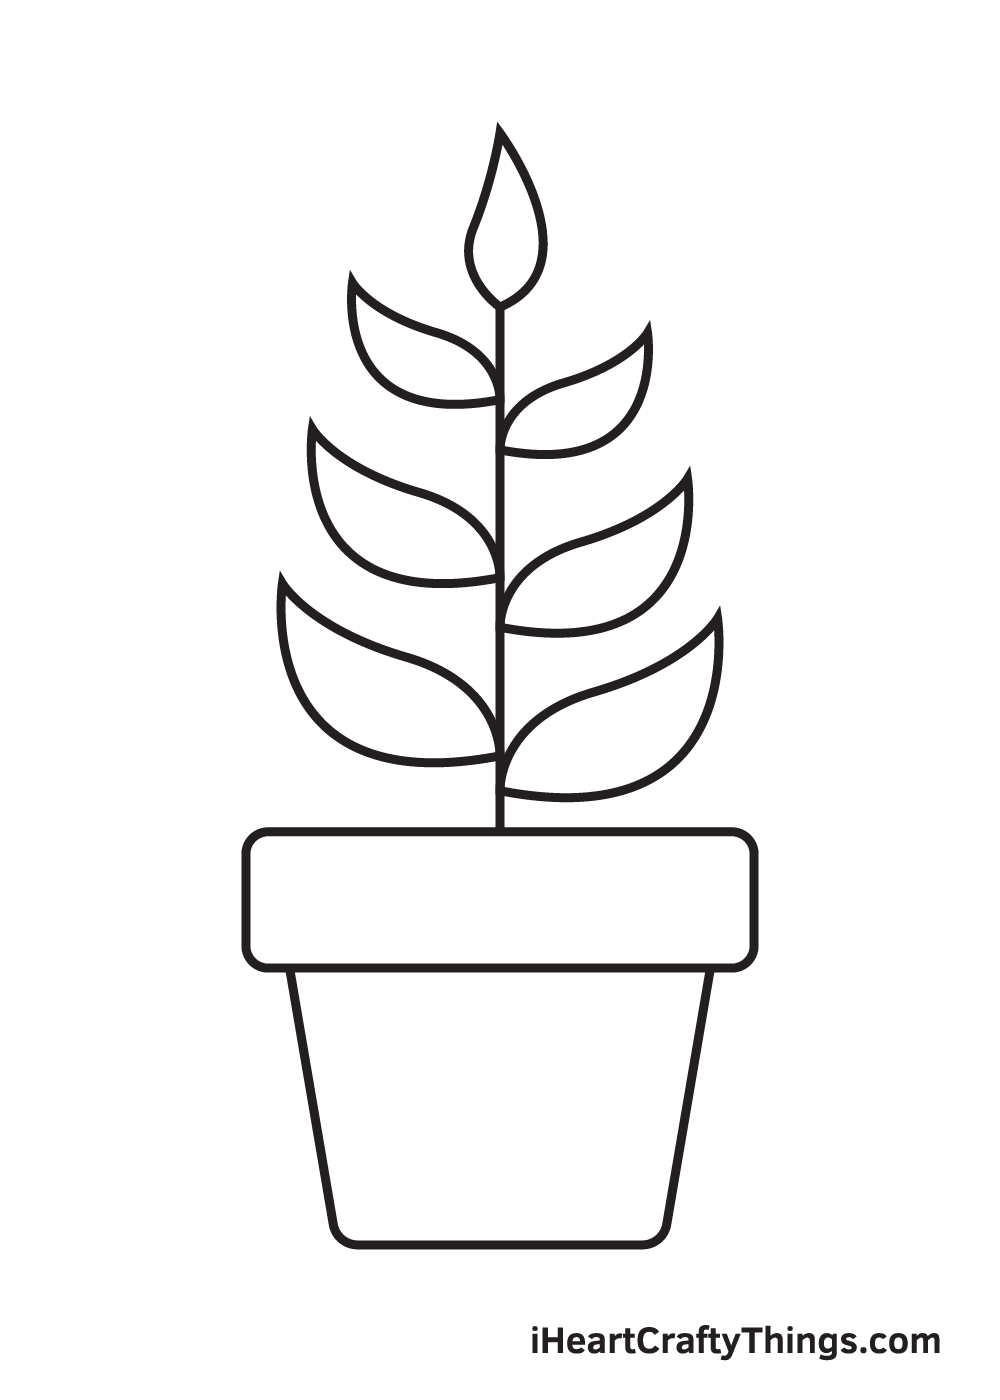 Plant Drawing – Step 9